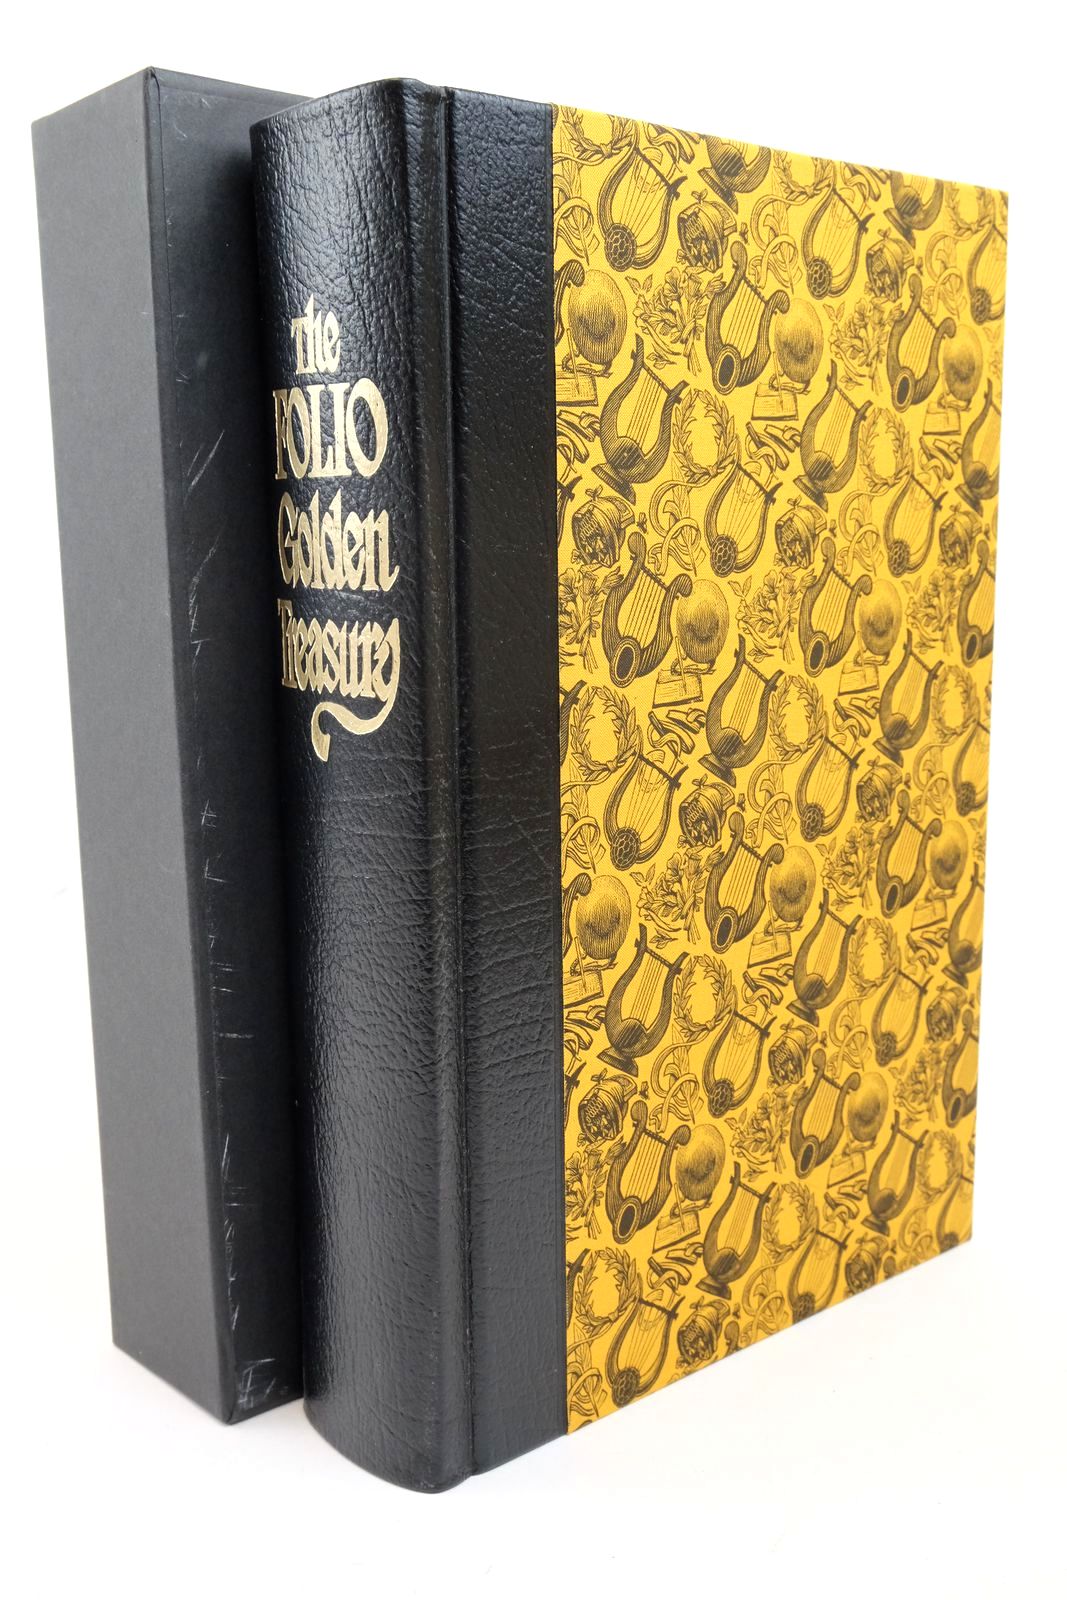 Photo of THE FOLIO GOLDEN TREASURY written by Michie, James et al,  illustrated by Brett, Simon et al.,  published by Folio Society (STOCK CODE: 1322897)  for sale by Stella & Rose's Books